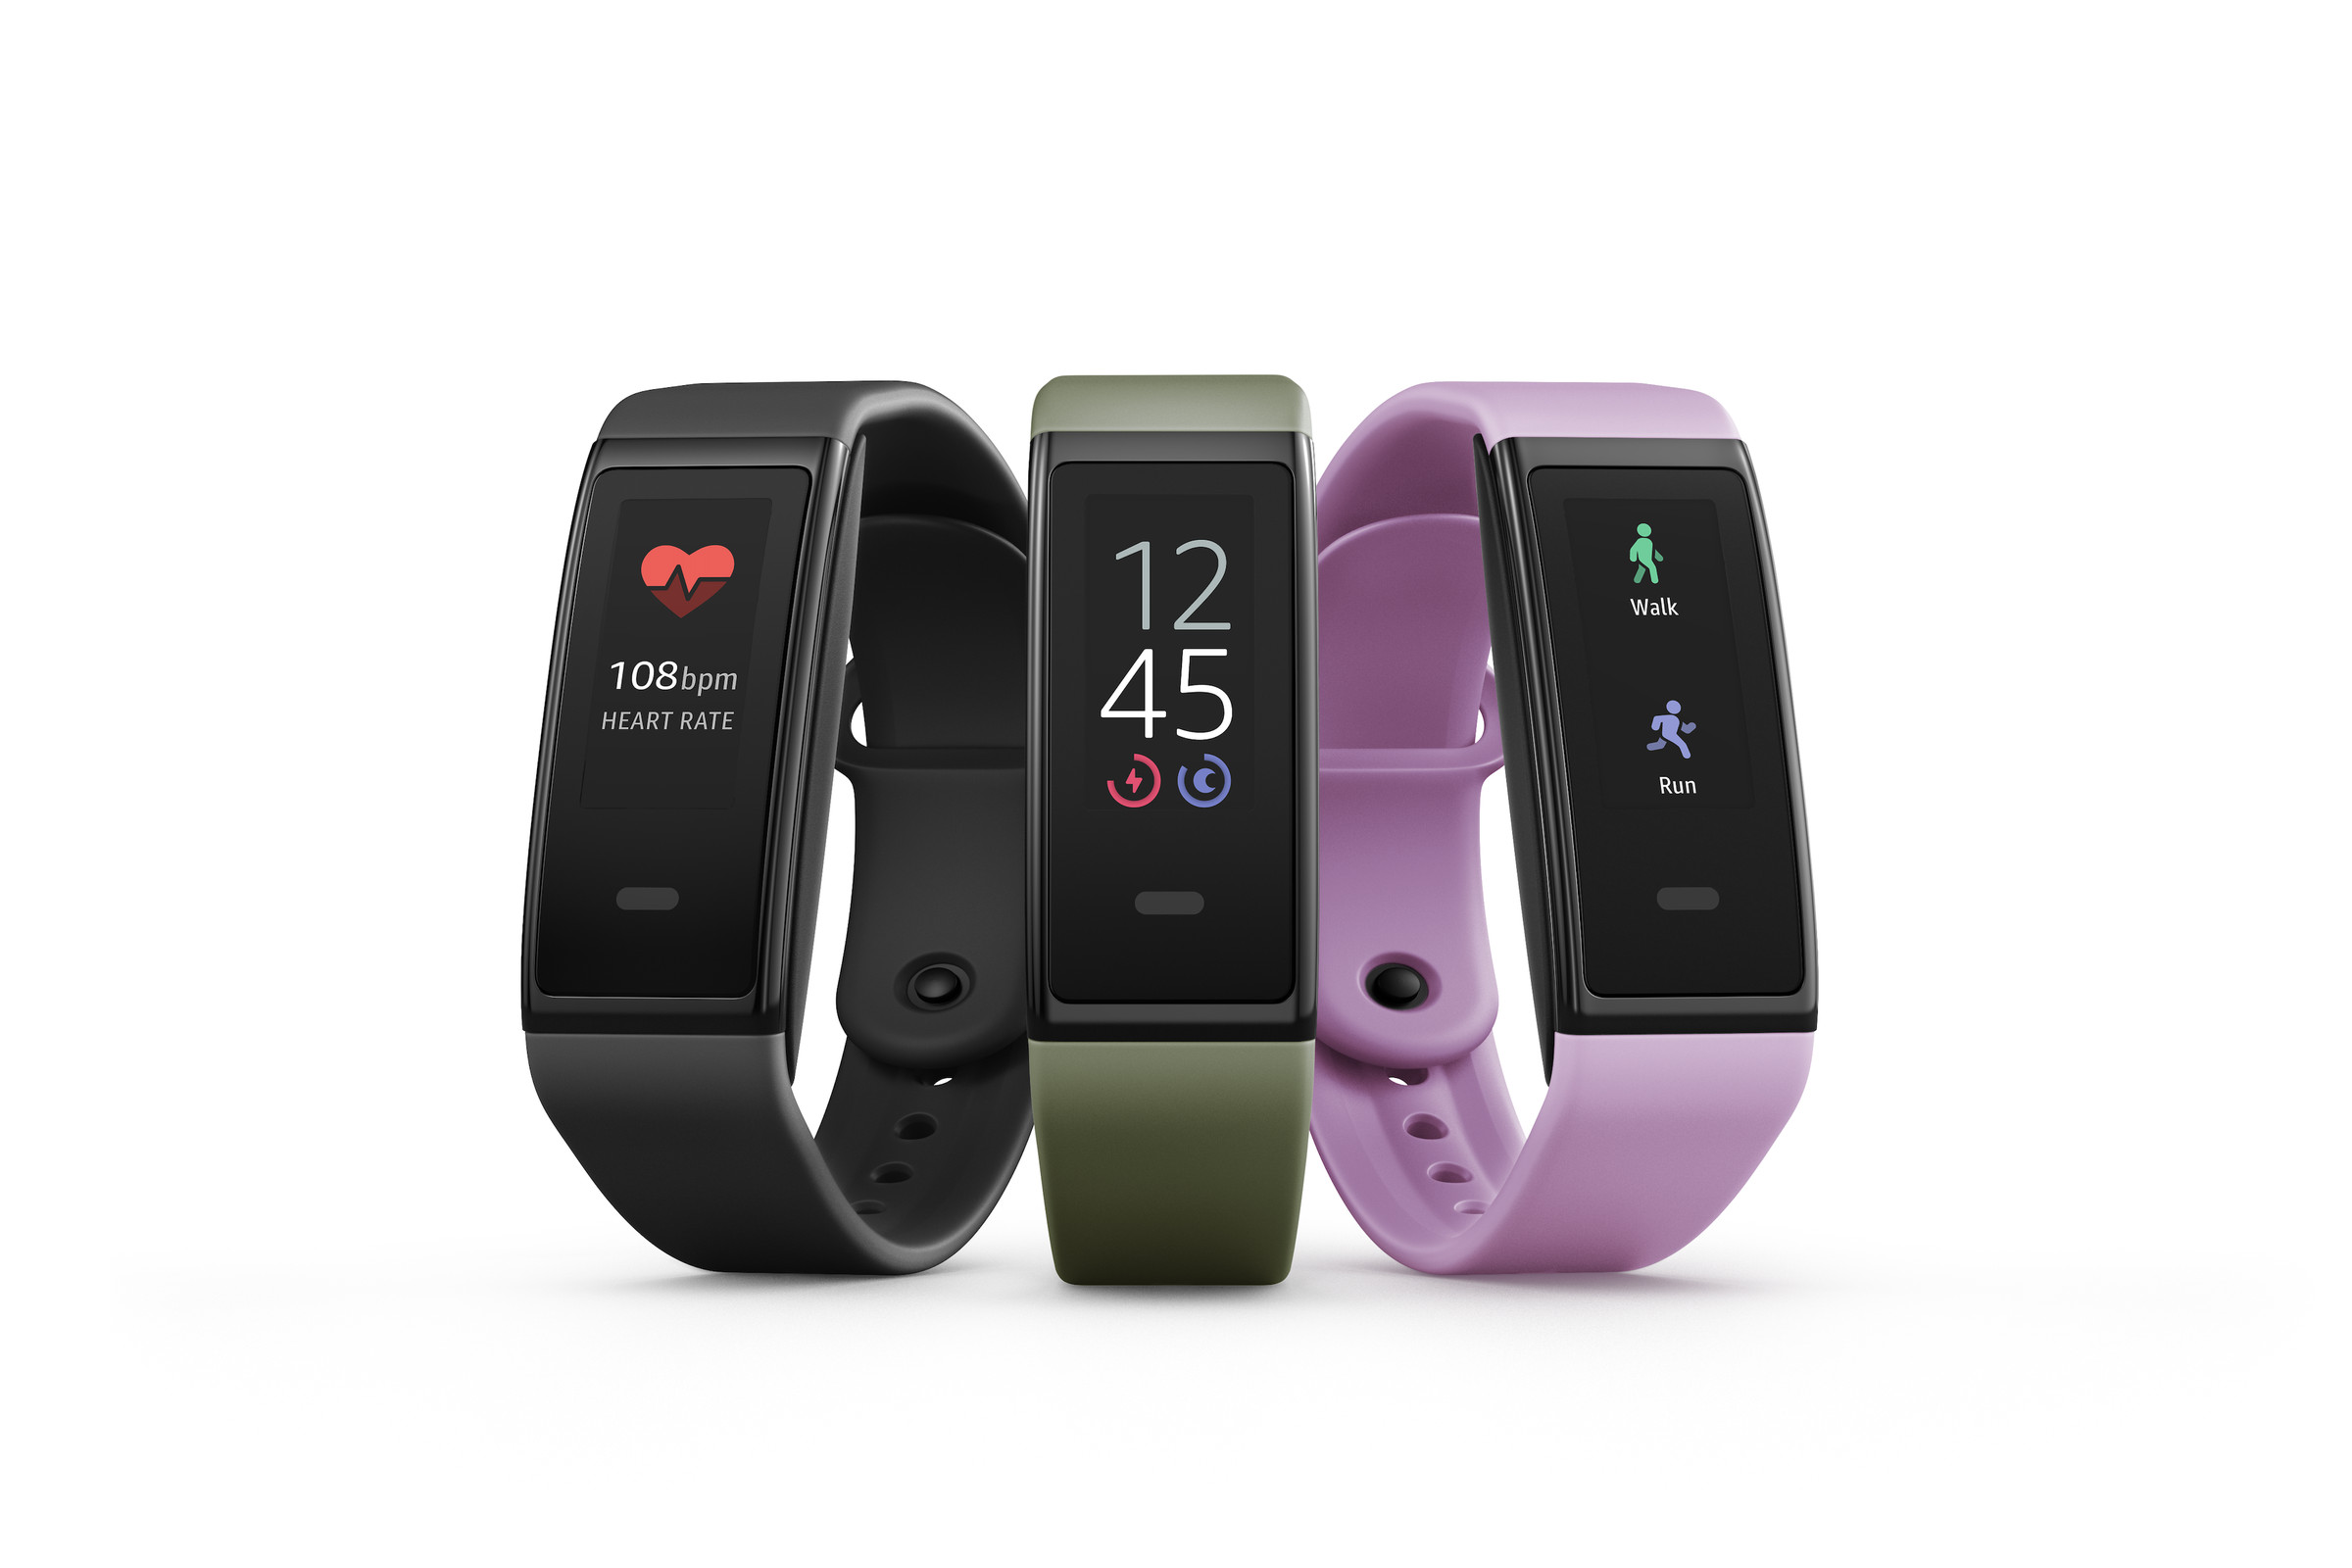 Amazon’s Halo View fitness tracker looks strikingly similar to the Fitbit Charge 5.